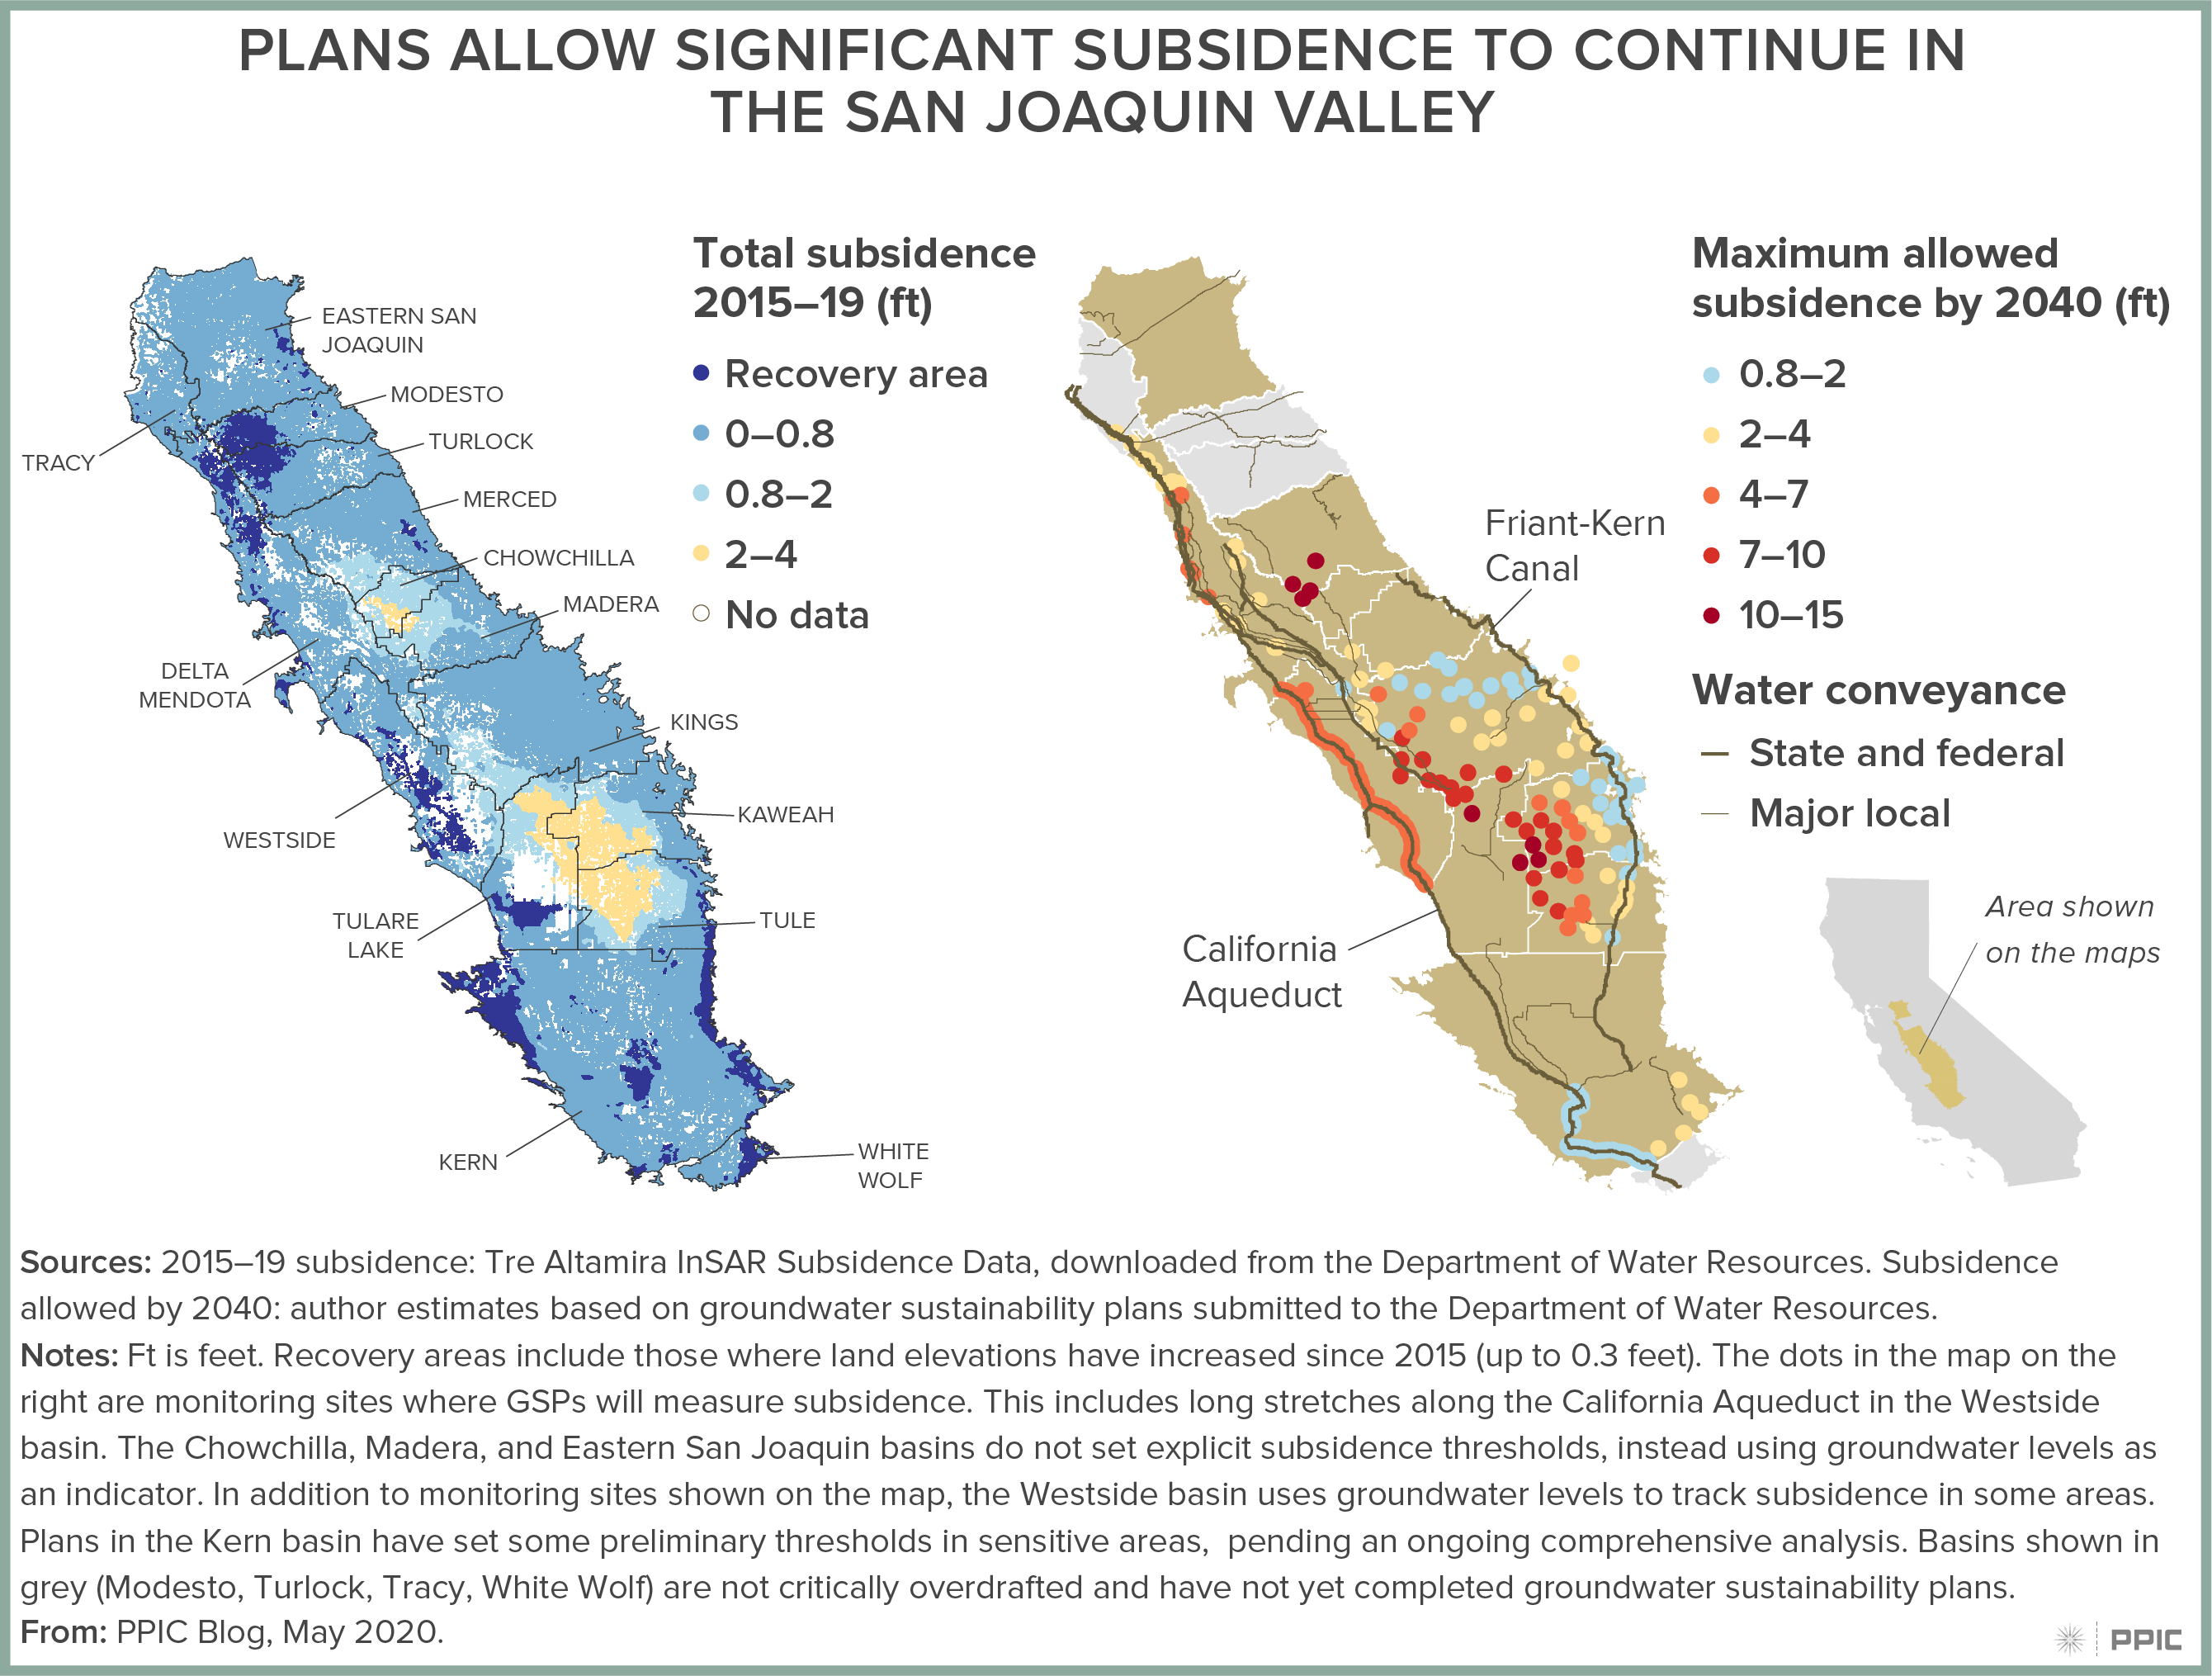 figure - Plans Allow Significant Subsidence to Continue in the San Joaquin Valley